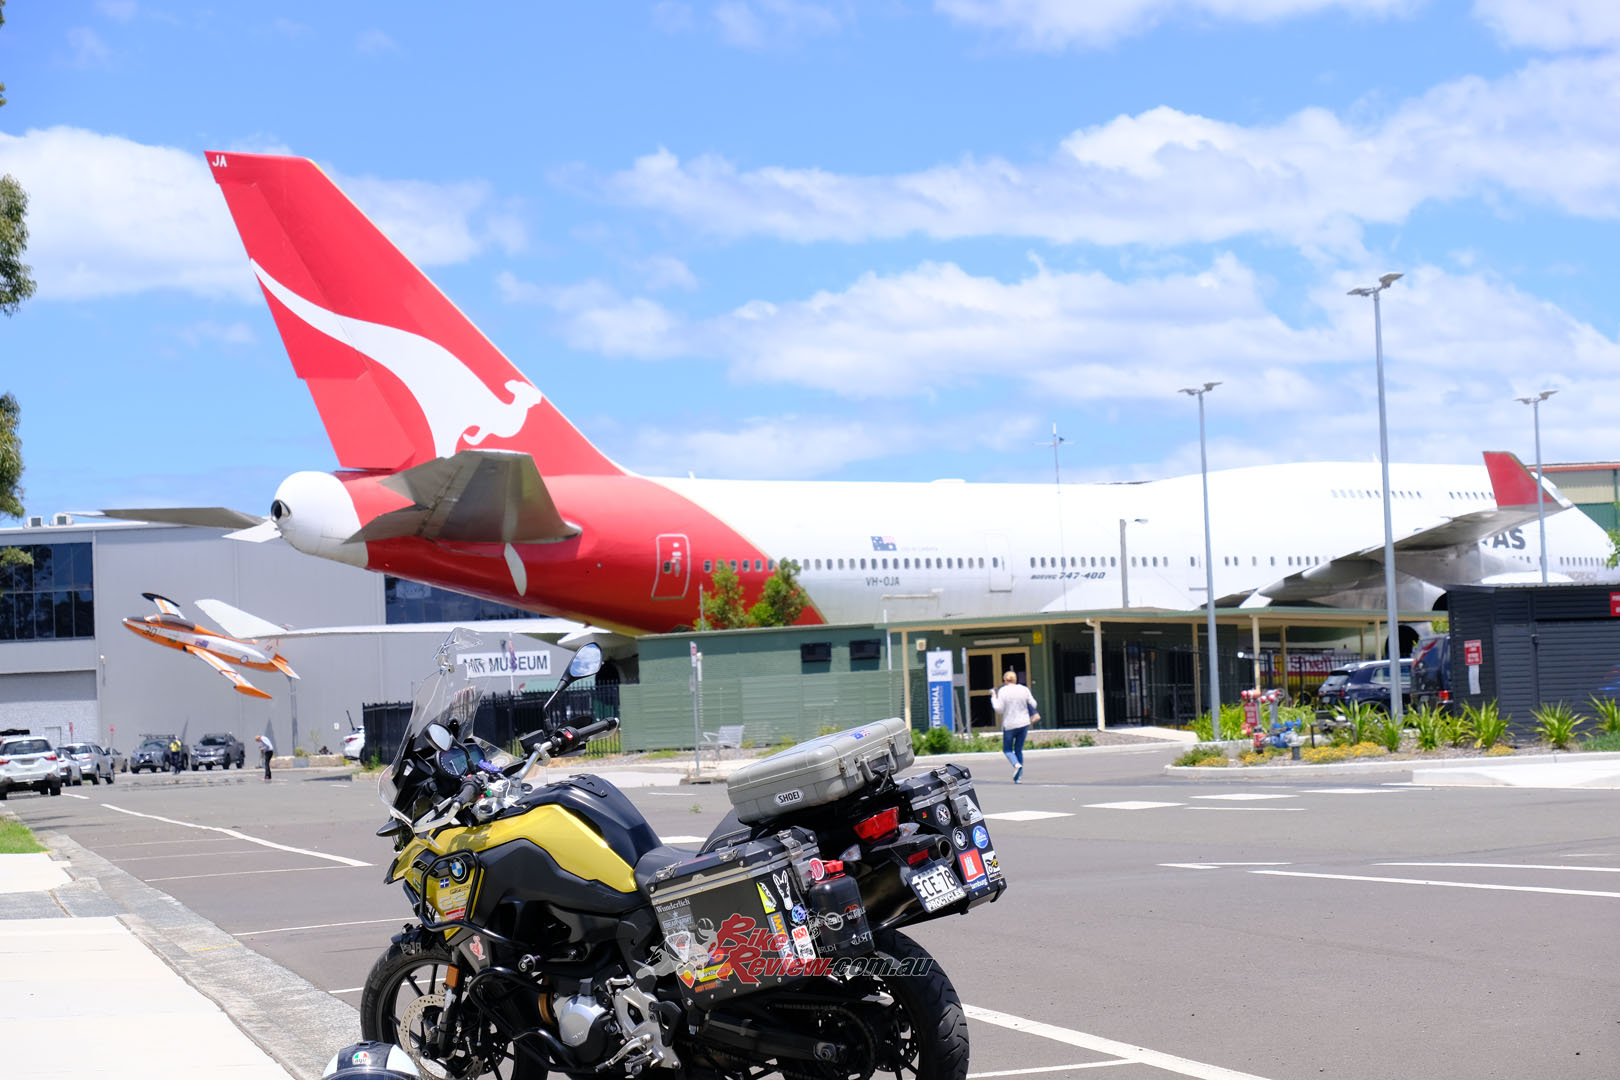 You can’t miss HARS at Shellharbour Airport. The tail of a retired Qantas 747 marks the spot in an unmistakable manner.